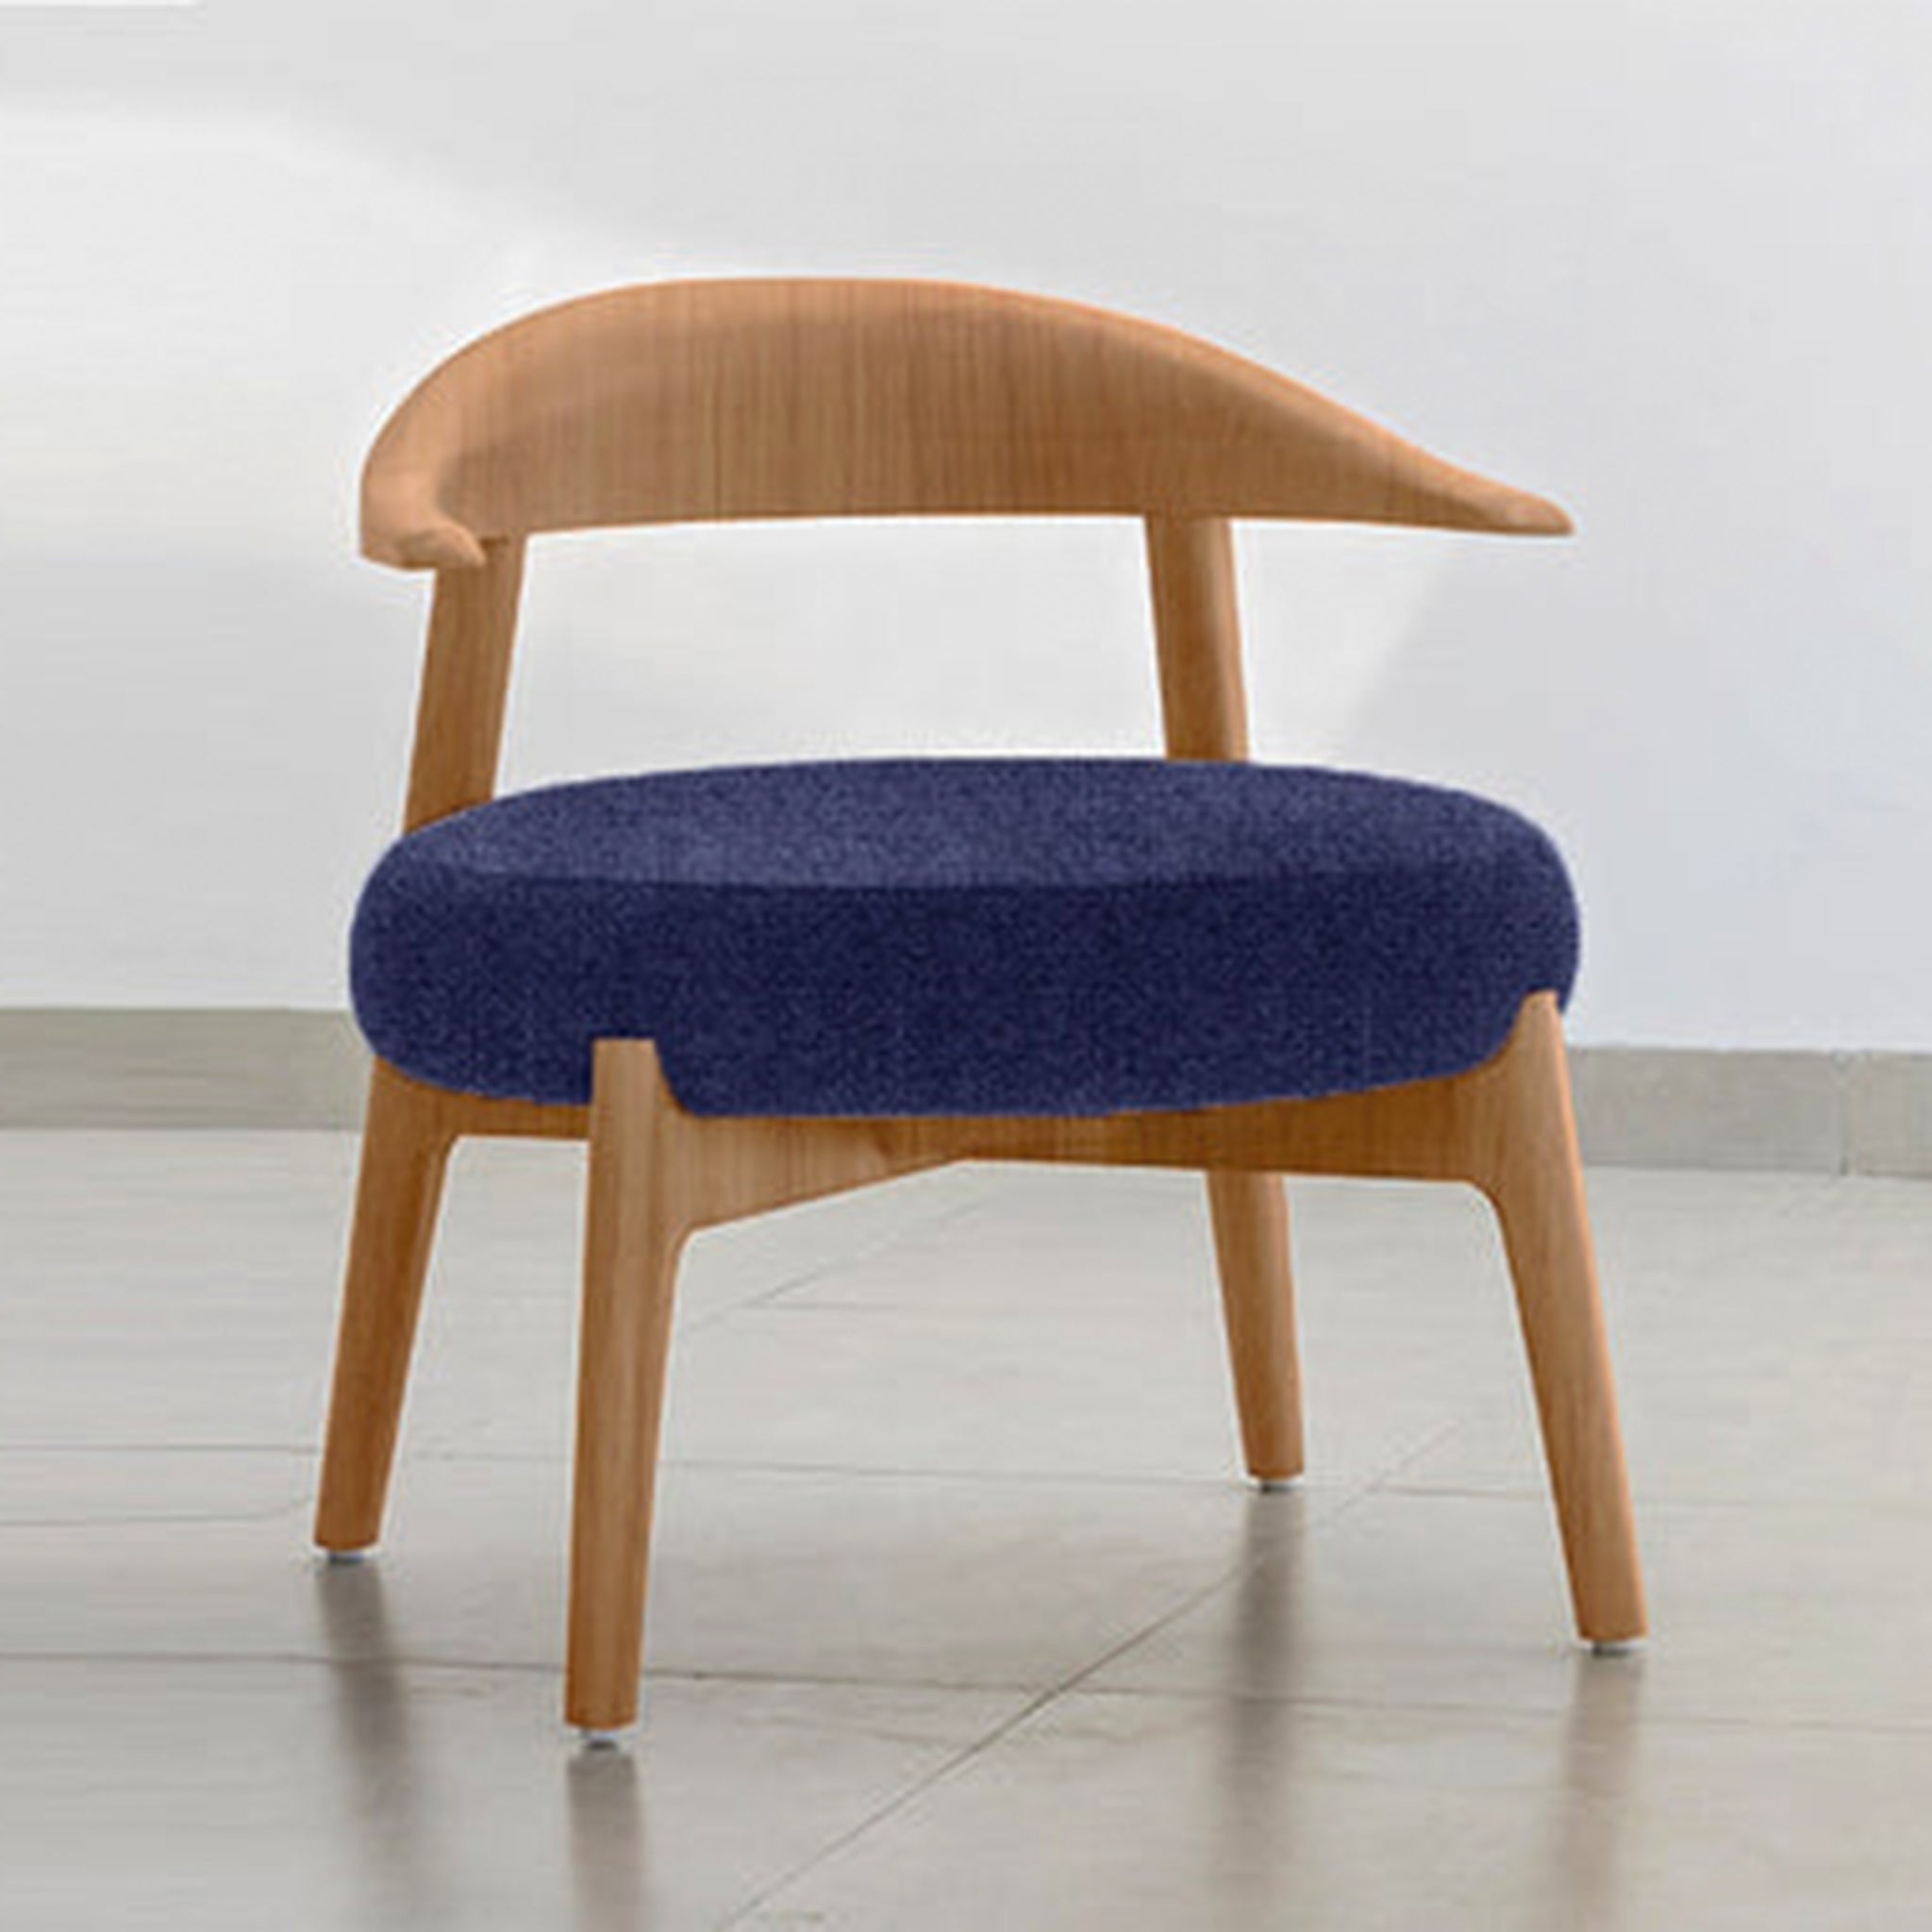 "Elegant and stylish Hyde Accent Chair for contemporary interiors"